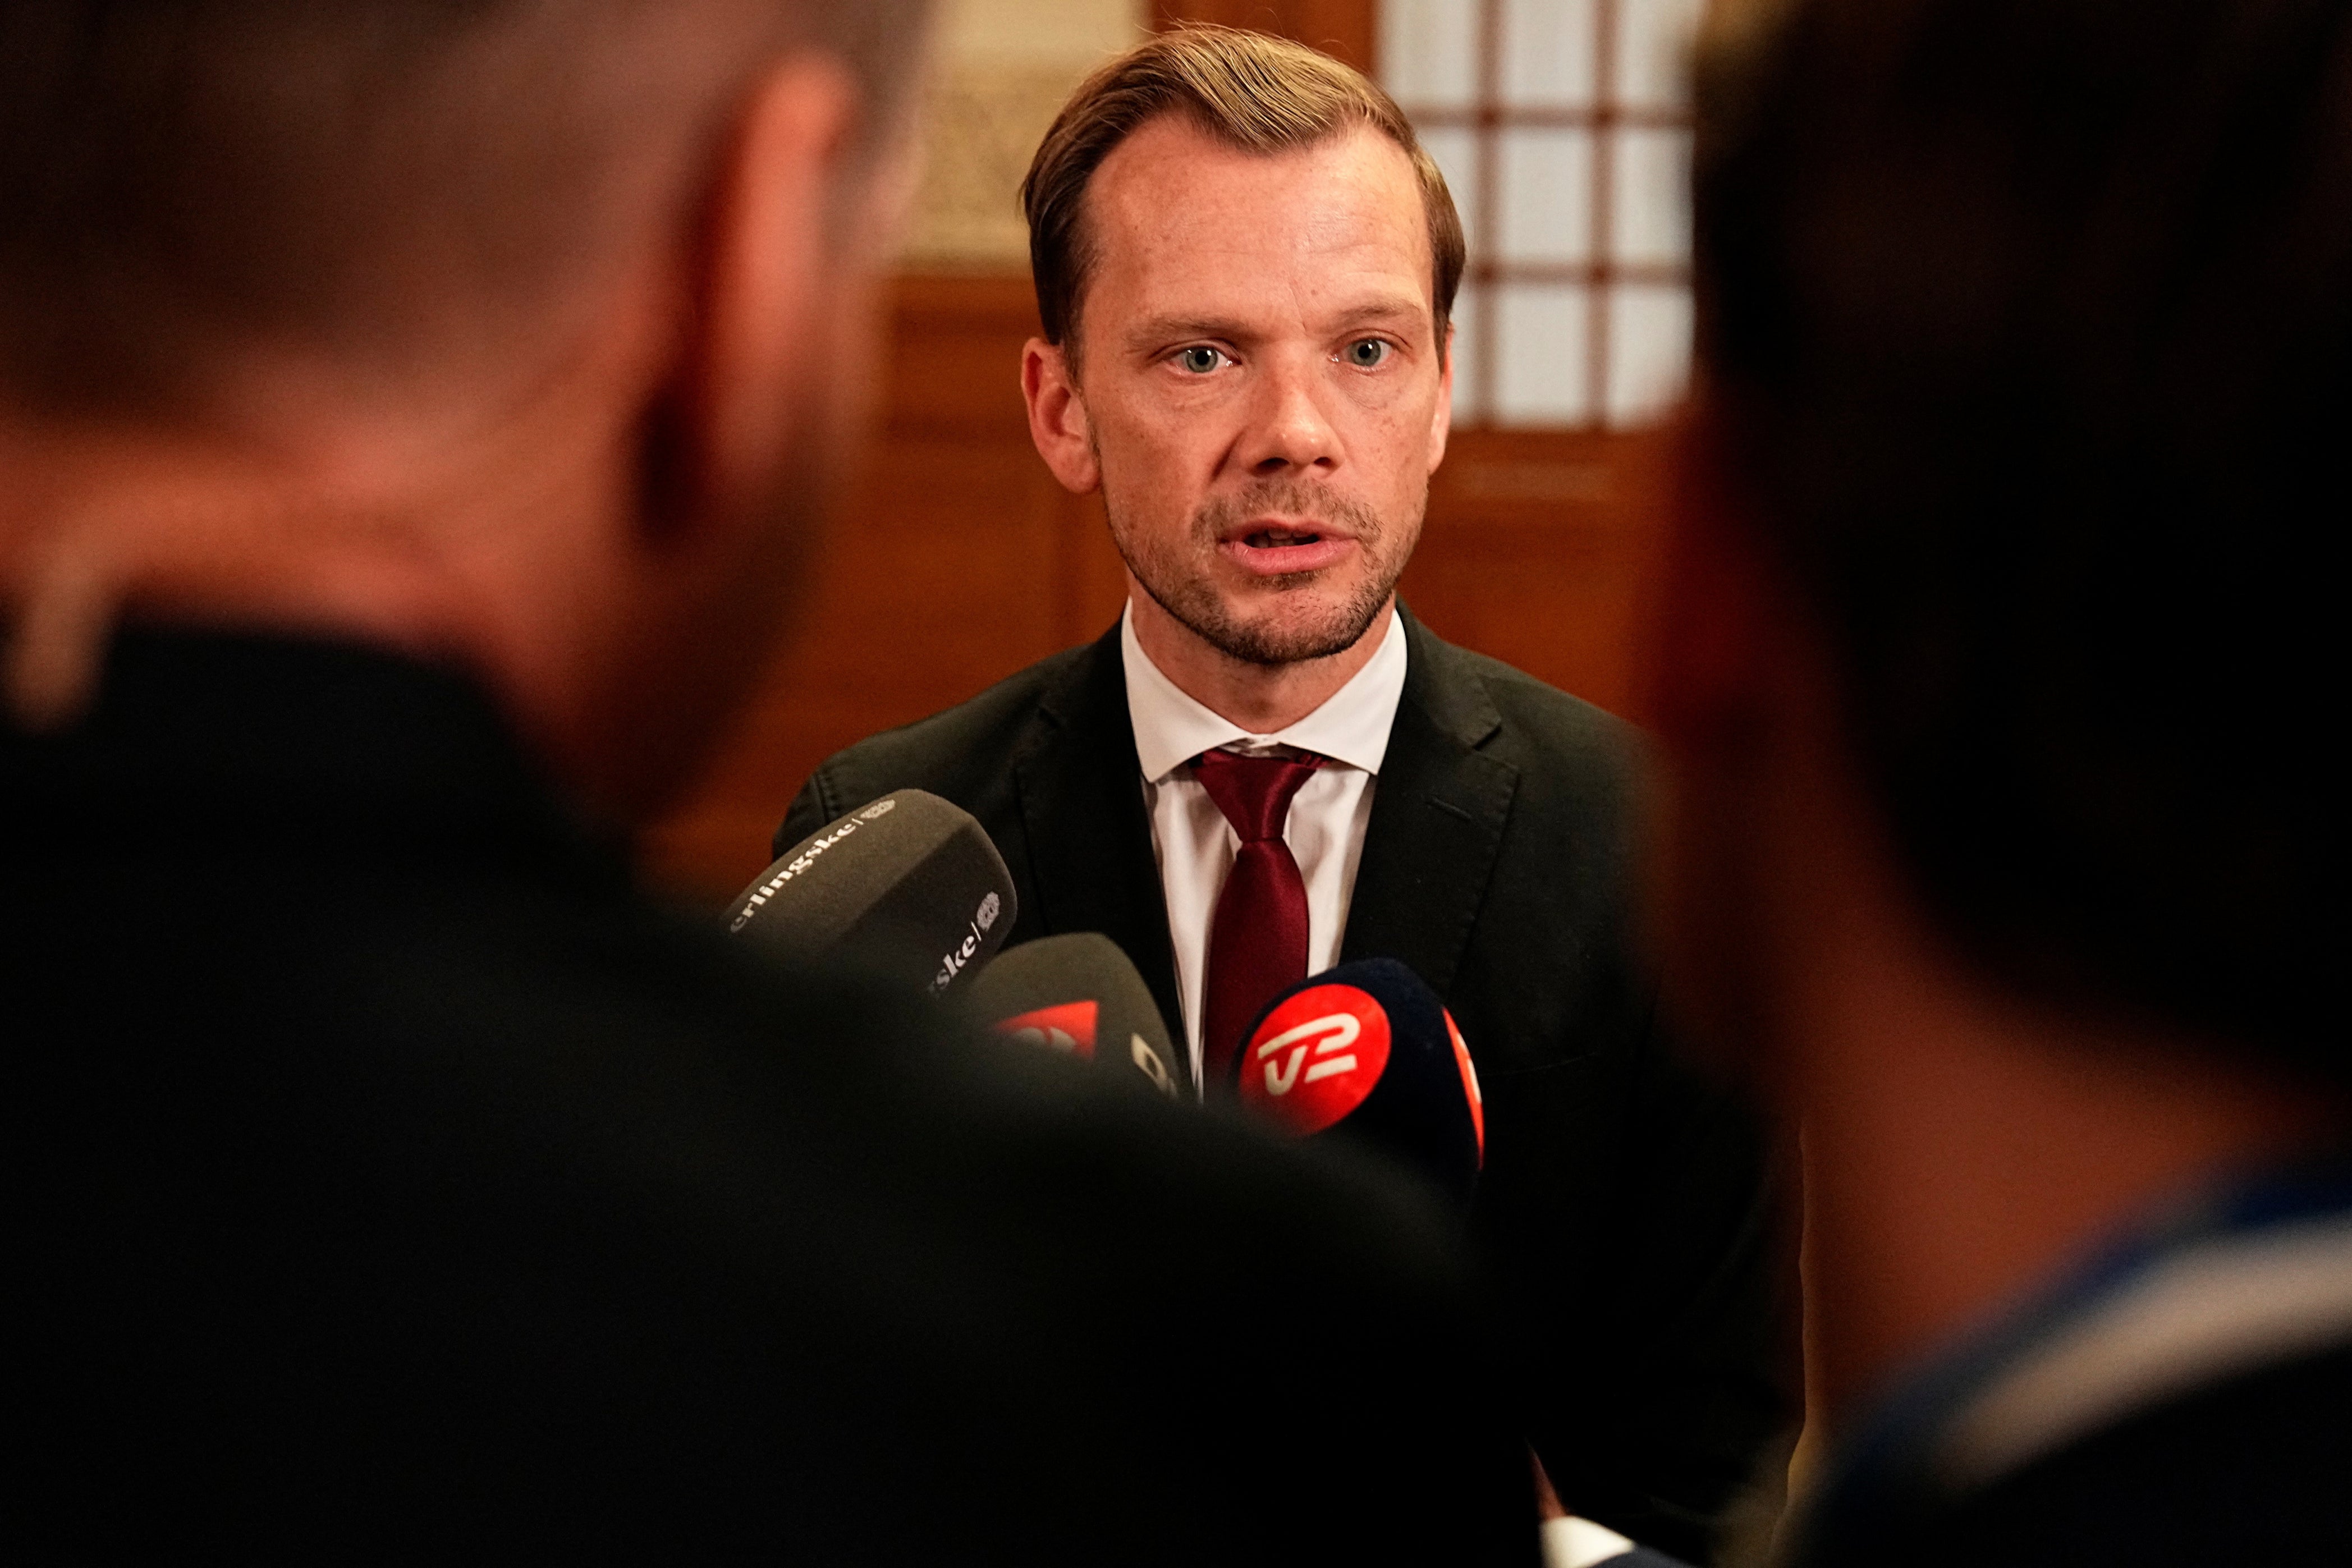 Peter Hummelgaard, Denmark’s justice minister, after the parliamentary vote